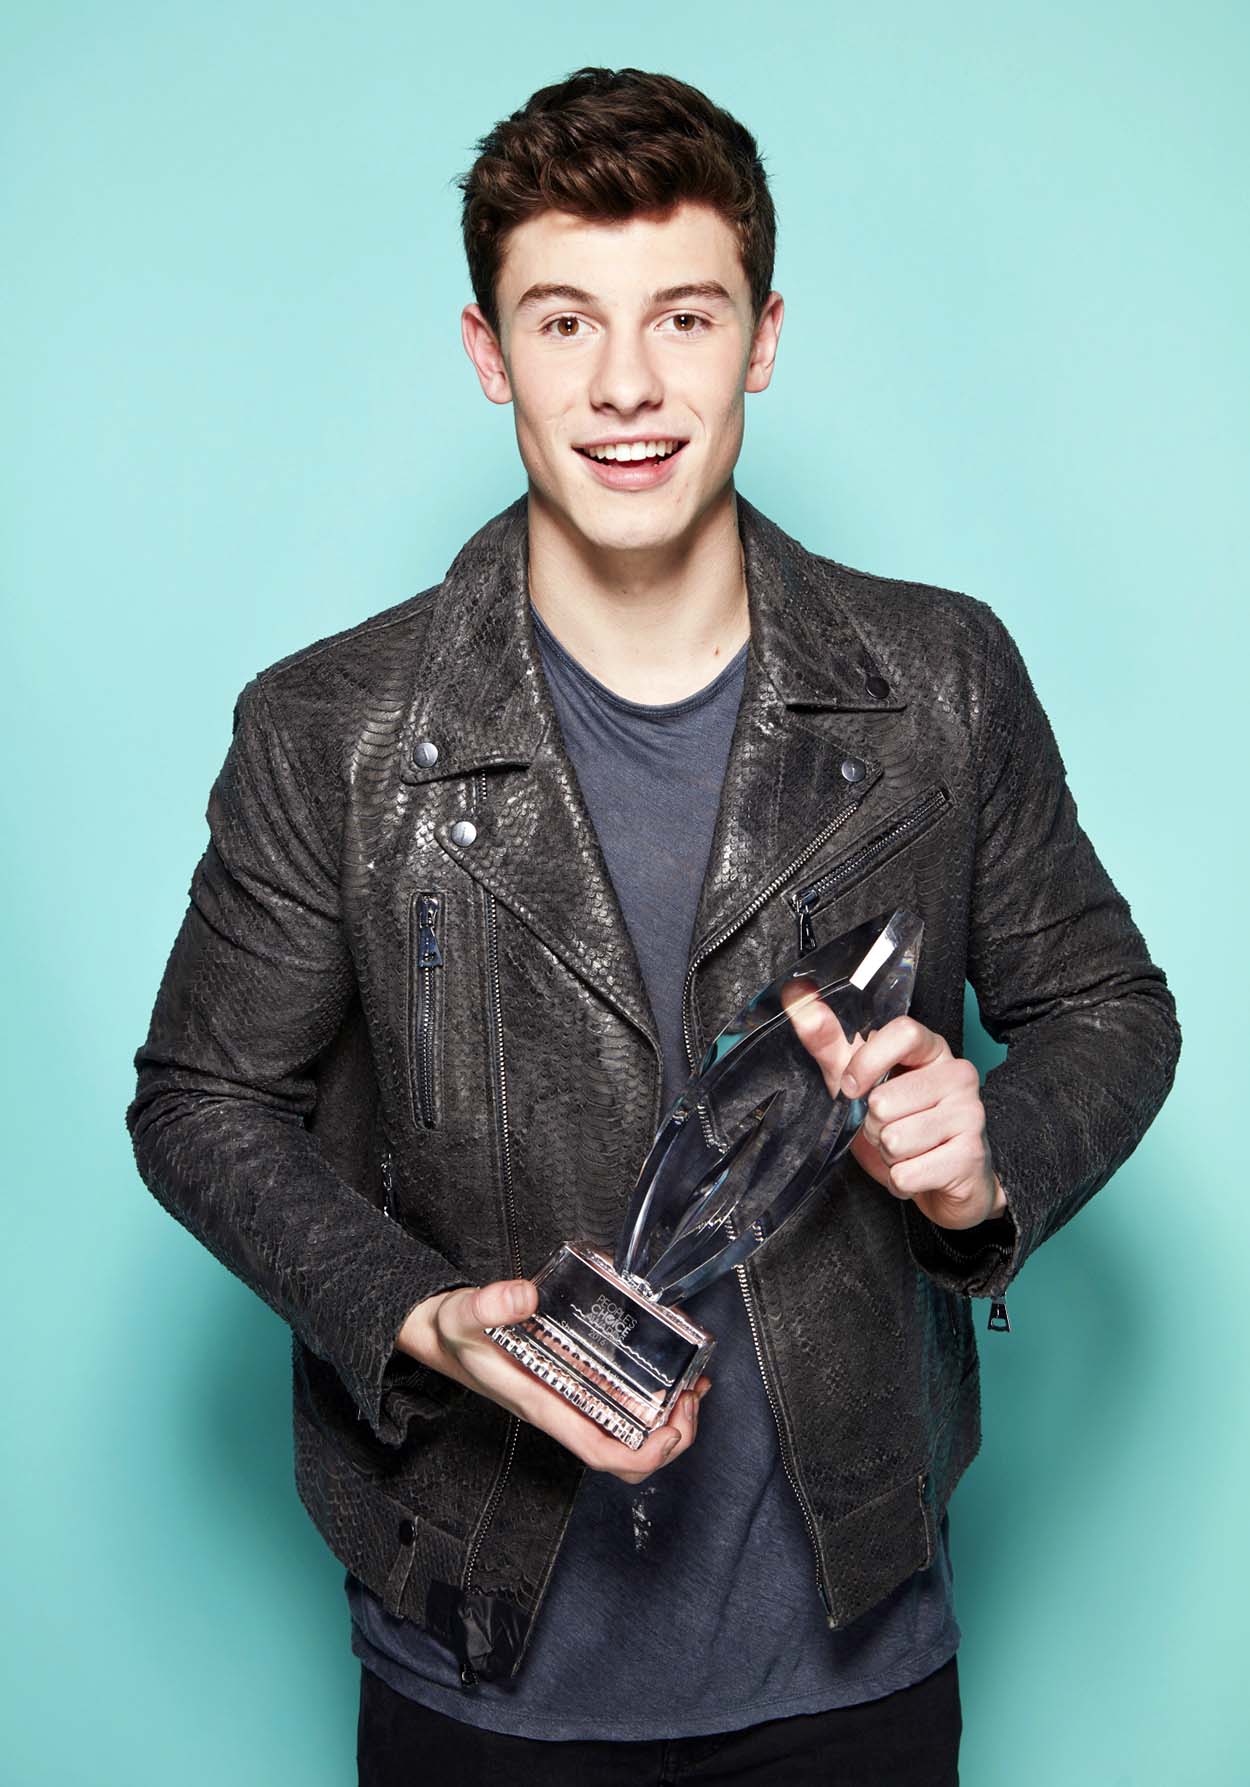 Shawn Mendes Top Picture 2016 Full HD